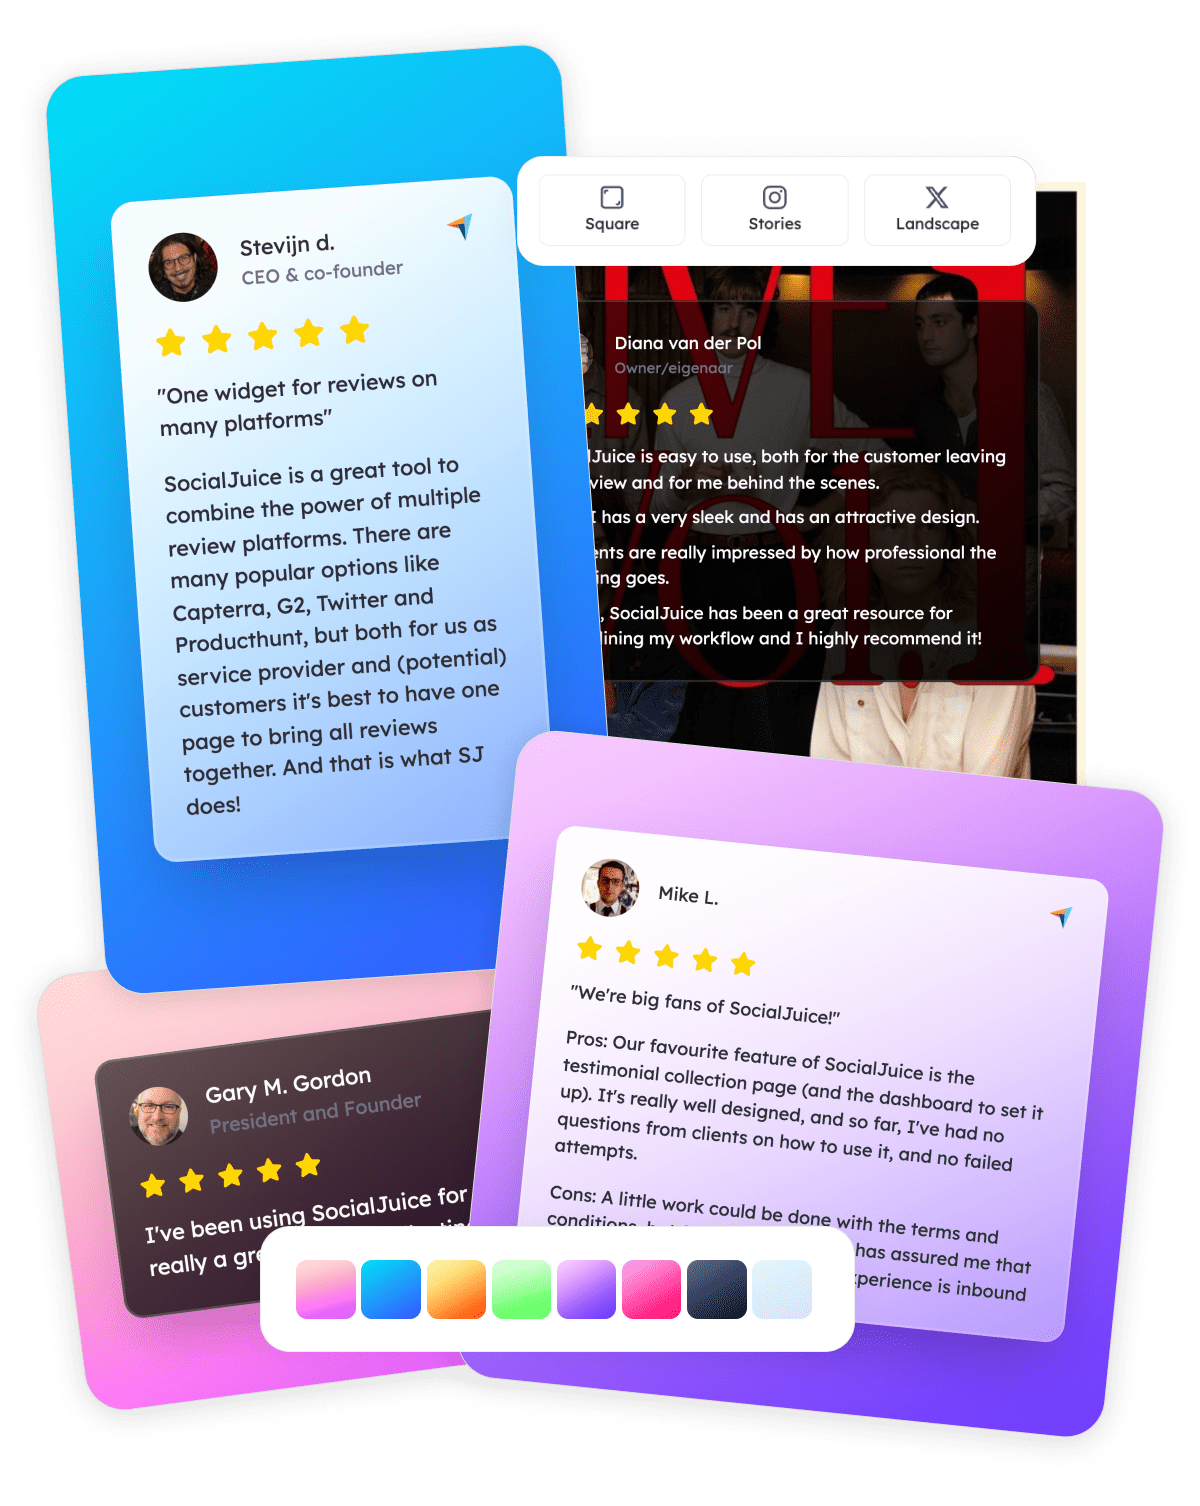 Socialjuice Designer - Create stunning review images for social media. Share your customer feedback on Instagram, Facebook, Twitter, and more.